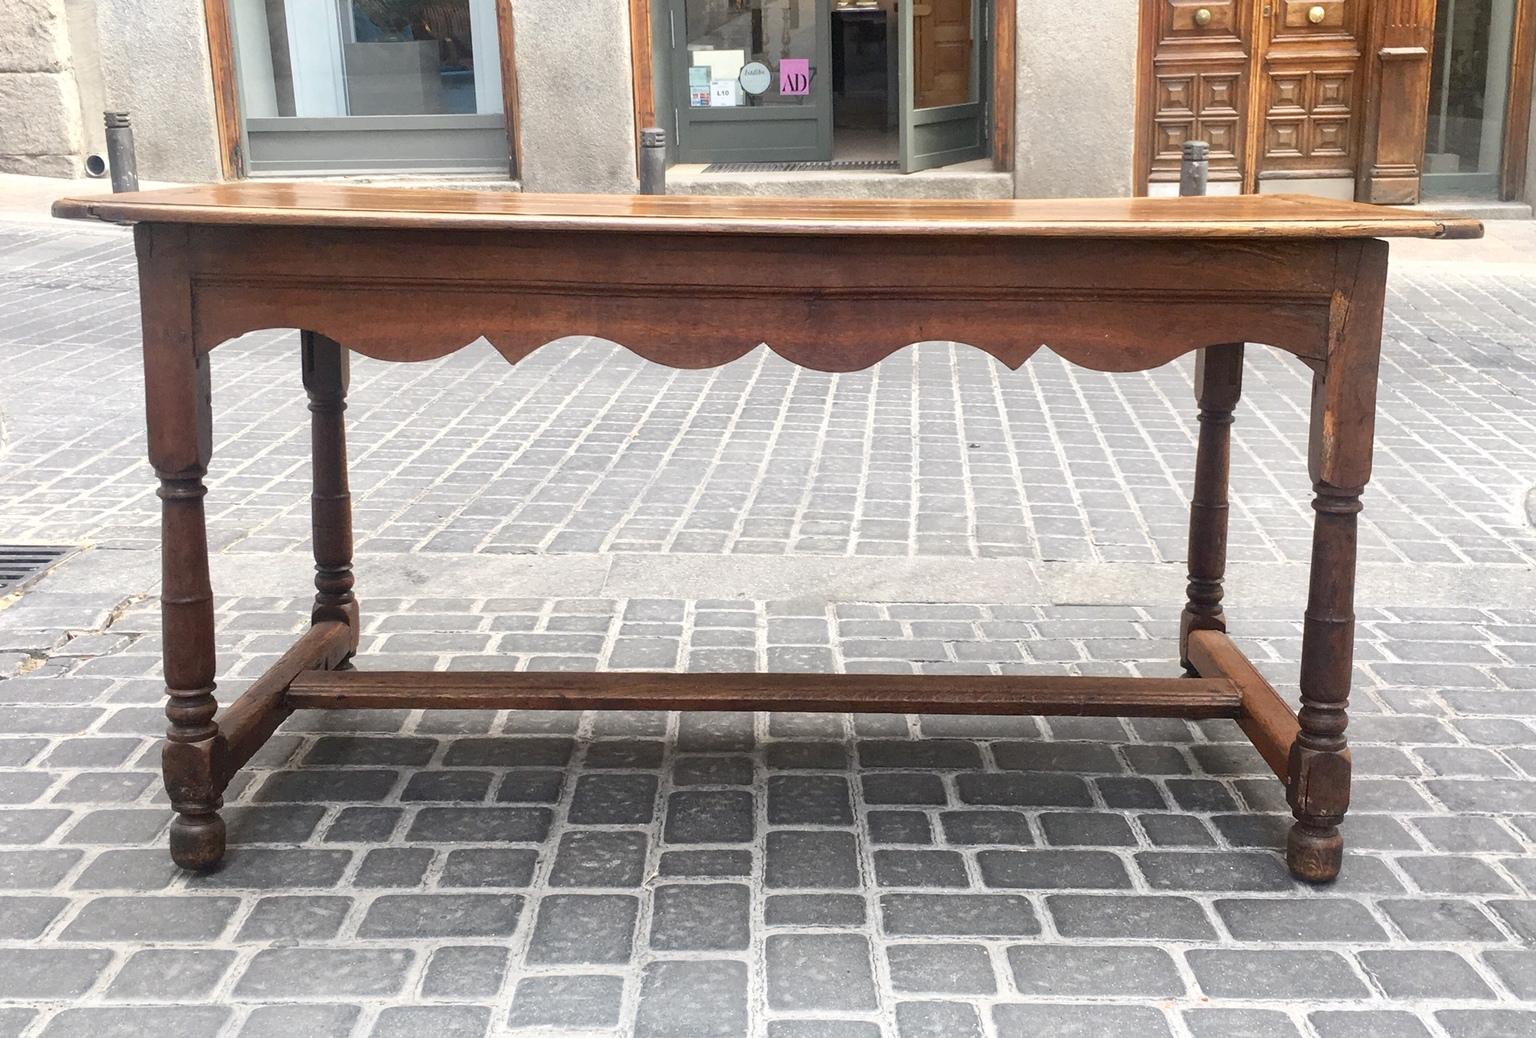 Rustic French oak table with turned legs and crossed stretcher from the 18th century. This table has a rectangular top with rounded corners that sit on an apron. The base is four turned legs. The legs are connected to each other with a crossed